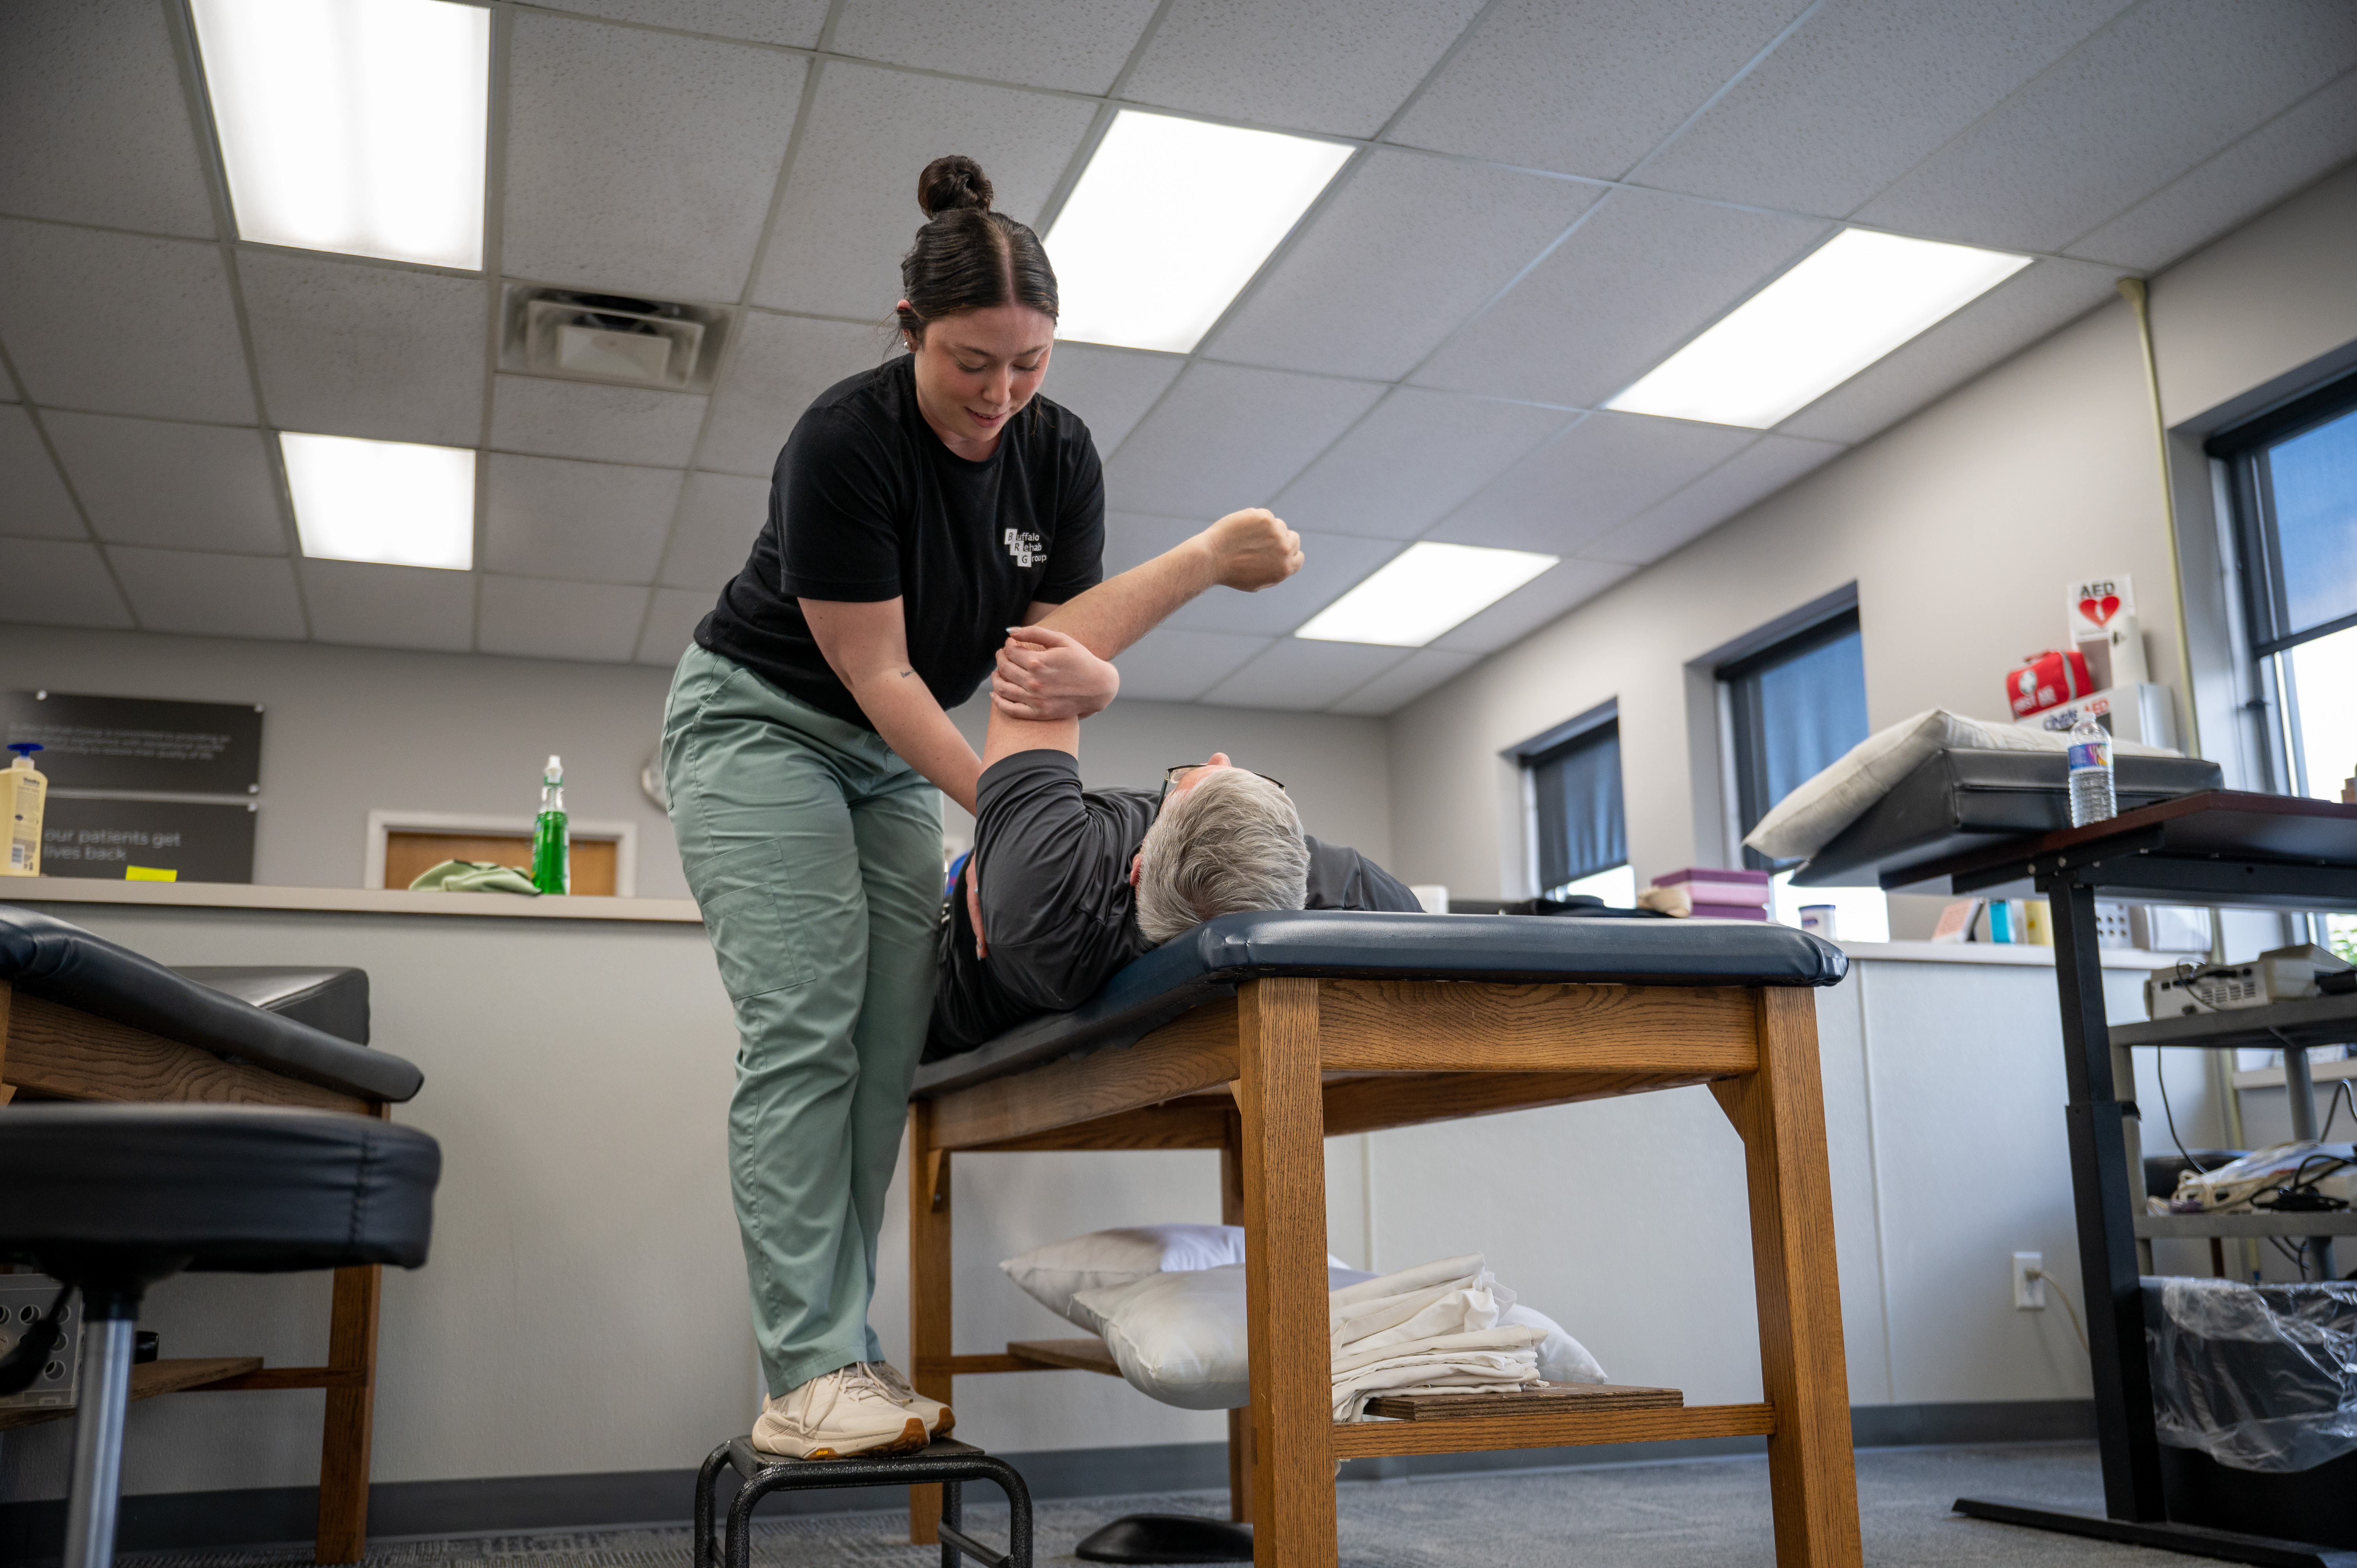 A Physical Therapist happily works on a shoulder patient.